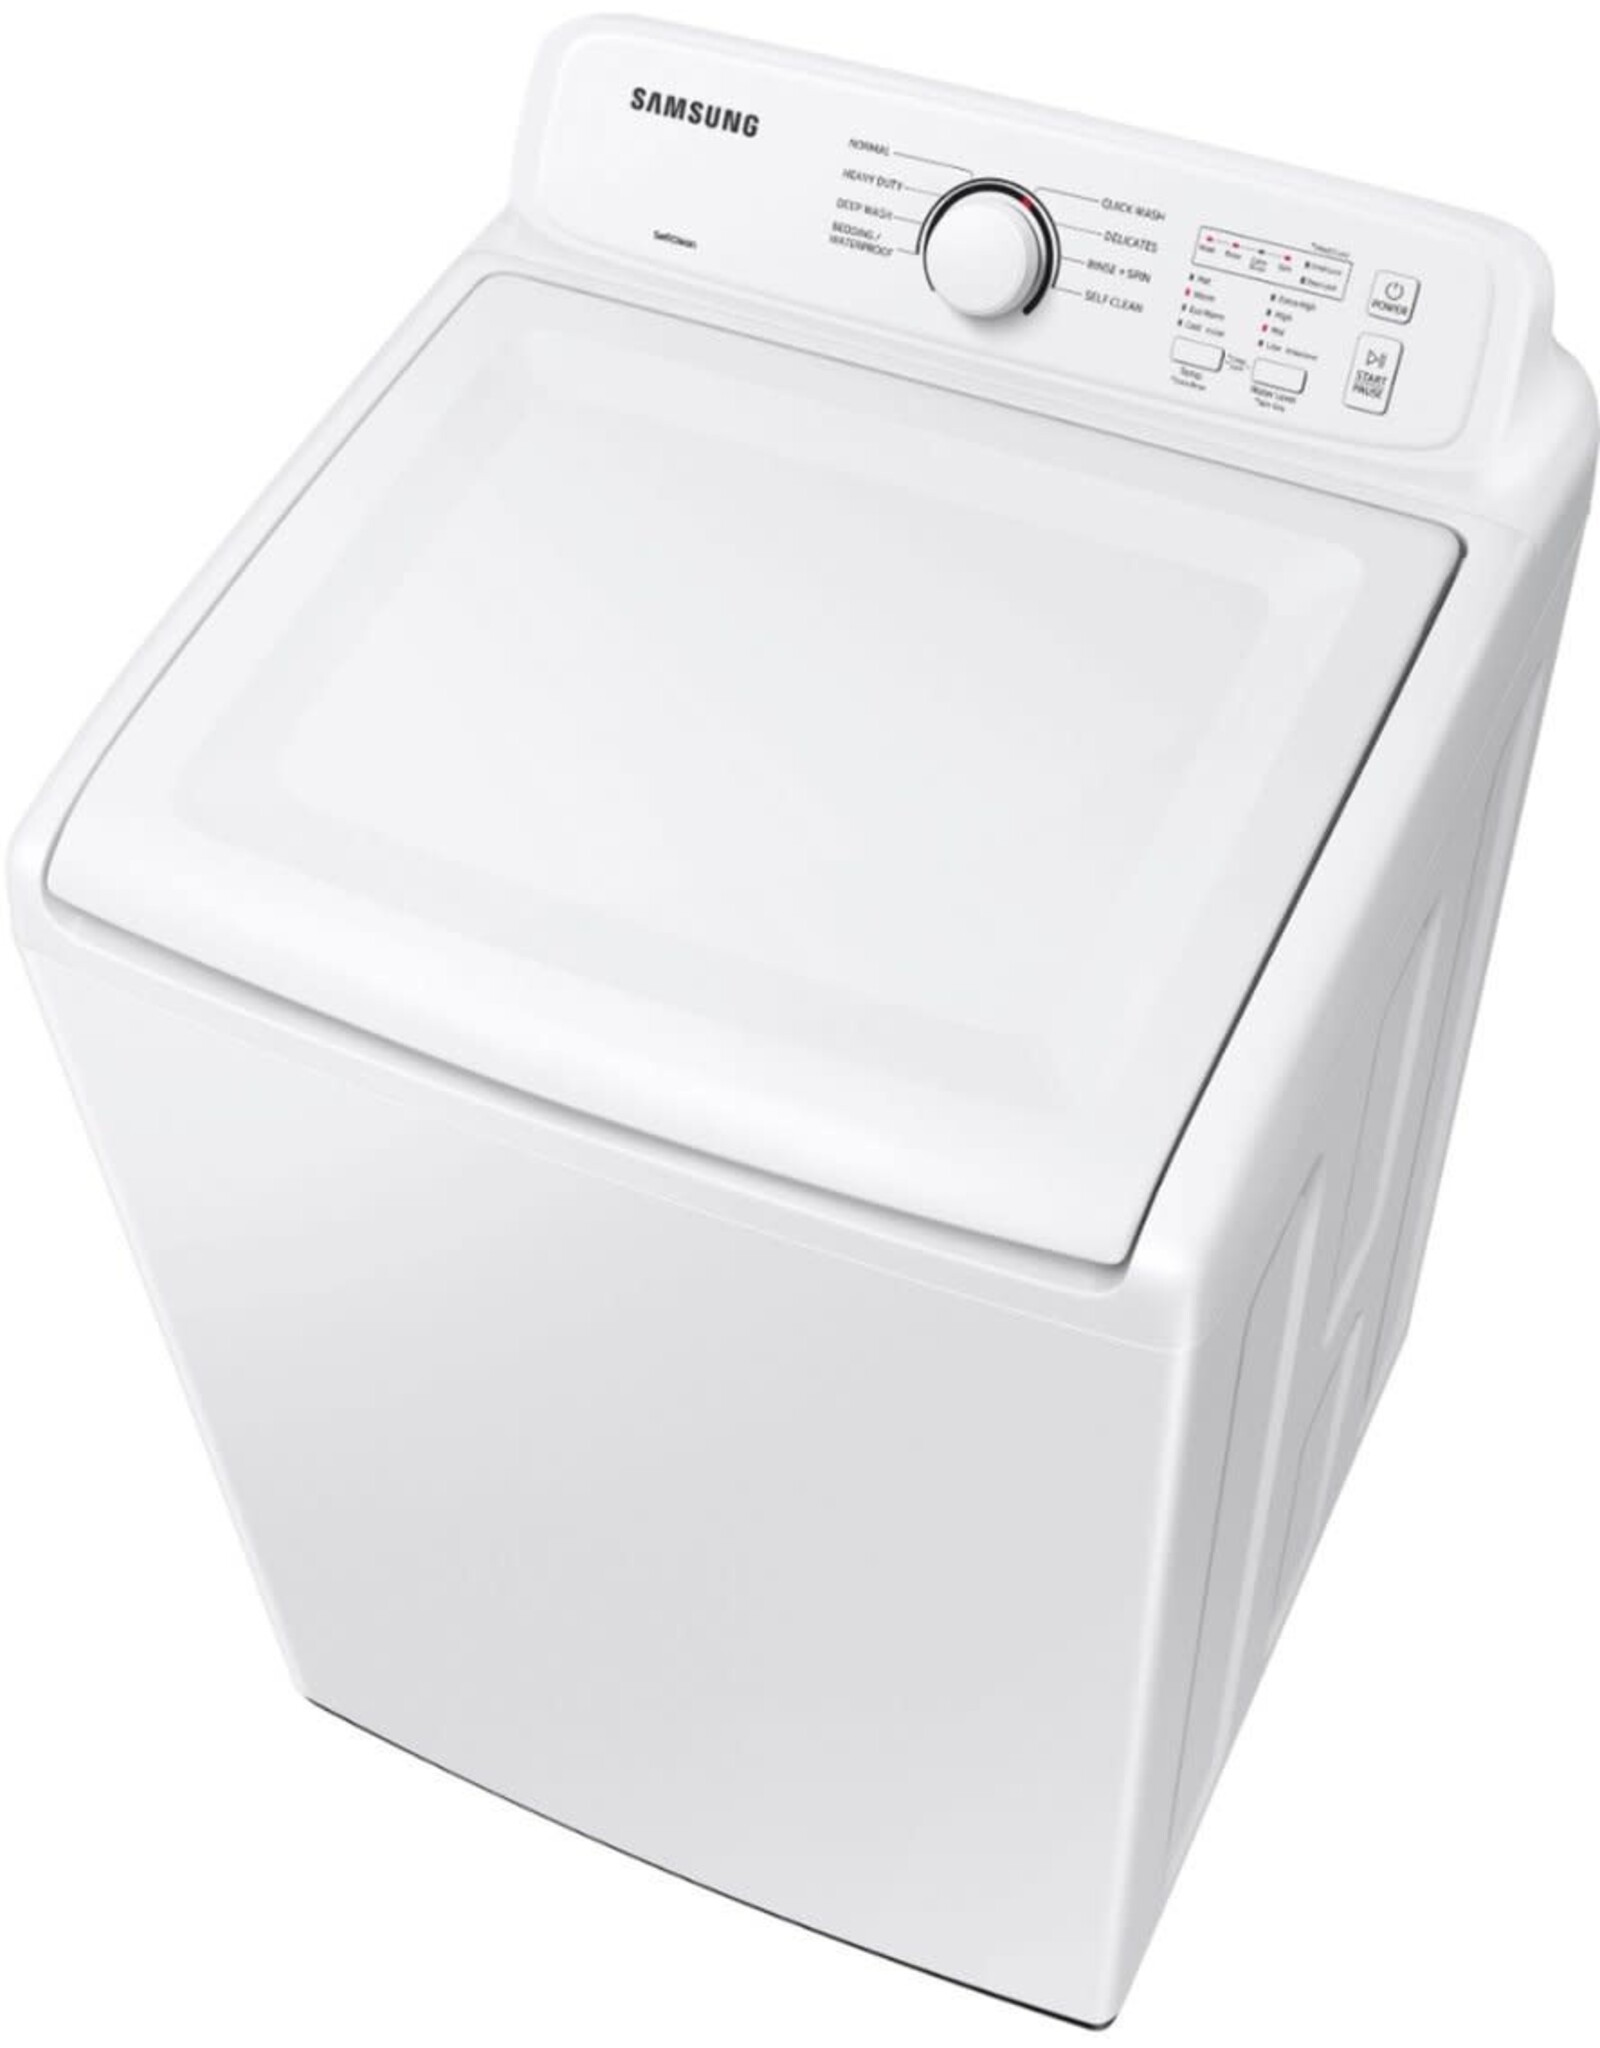 SAMSUNG WA40A3005AW  27 in. 4.0 cu. ft. Capacity White Top Load Washer, Agitator, with Soft Close Lid